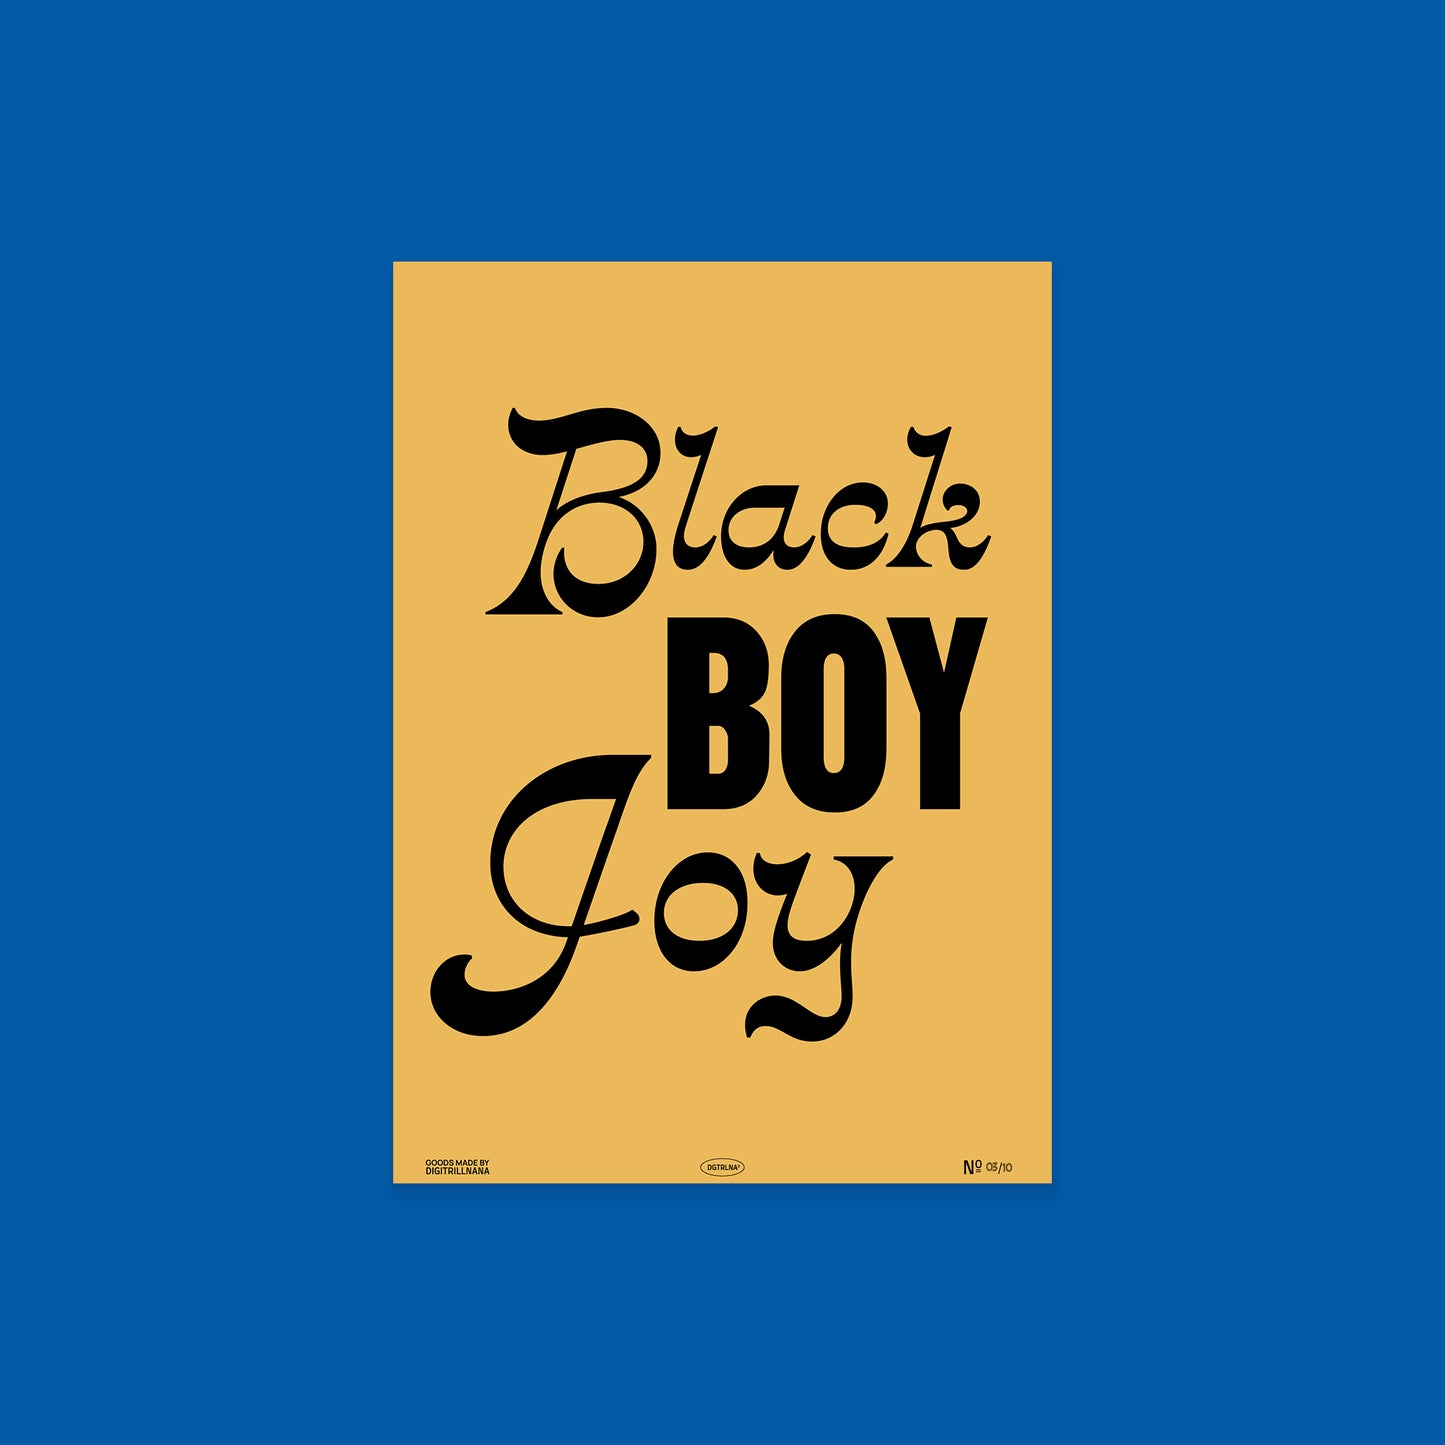 Black Boy Joy 5x7” typography inspirational quote art print  from Goods Made By Digitrillnana, Ashley Fletcher. Art for Black Men. Perfect for home decor, wall art, art prints, and more! Black Woman Owned.